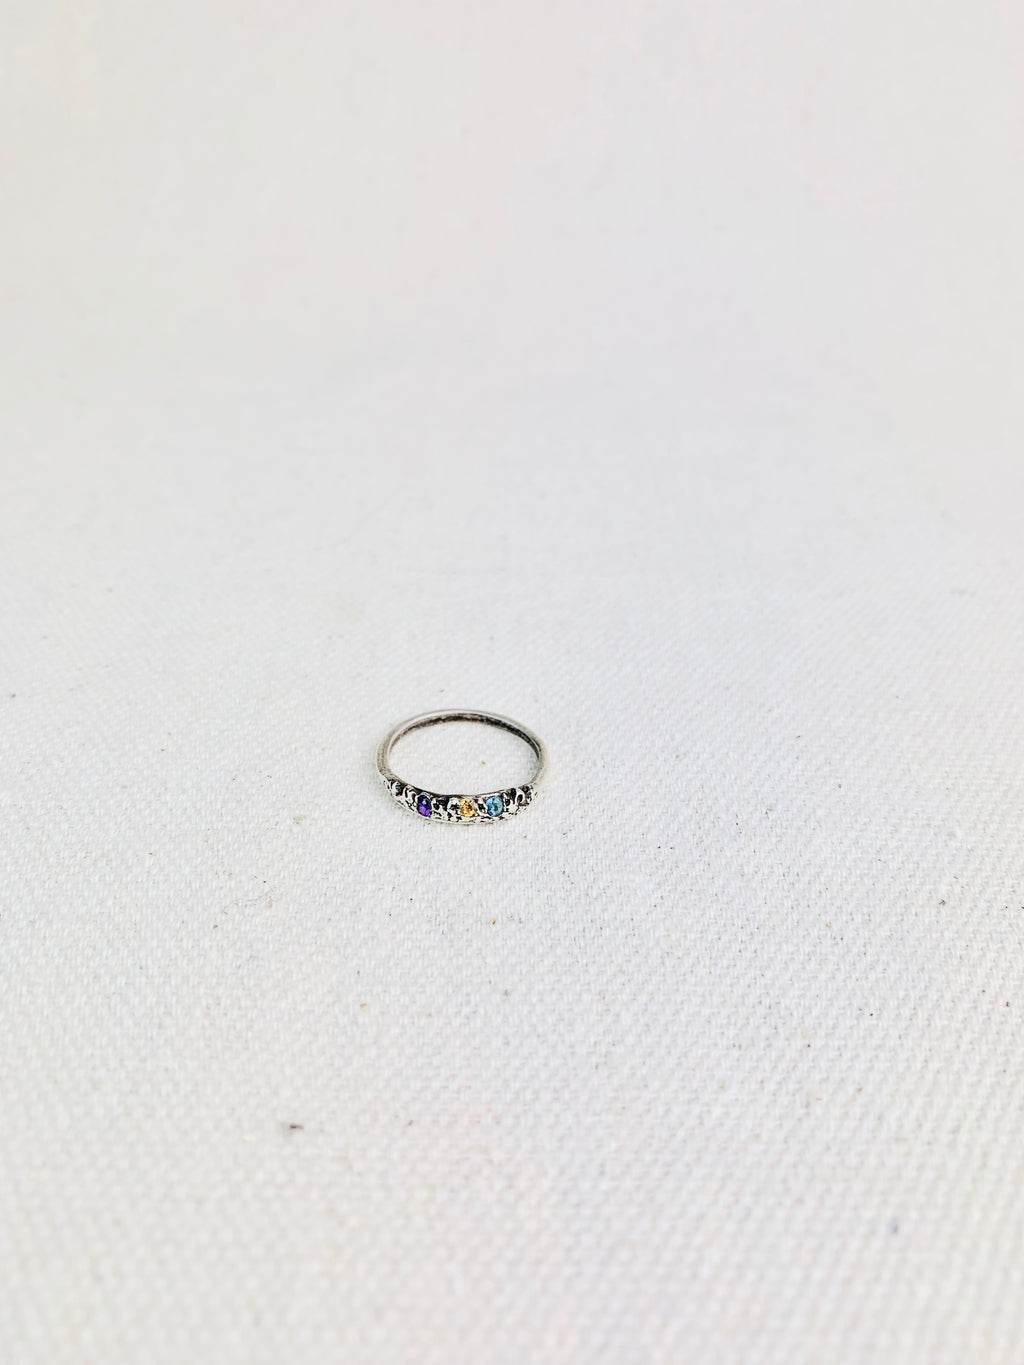 Kria "Love" in Icelandic Silver Crown Ring Size 6.5